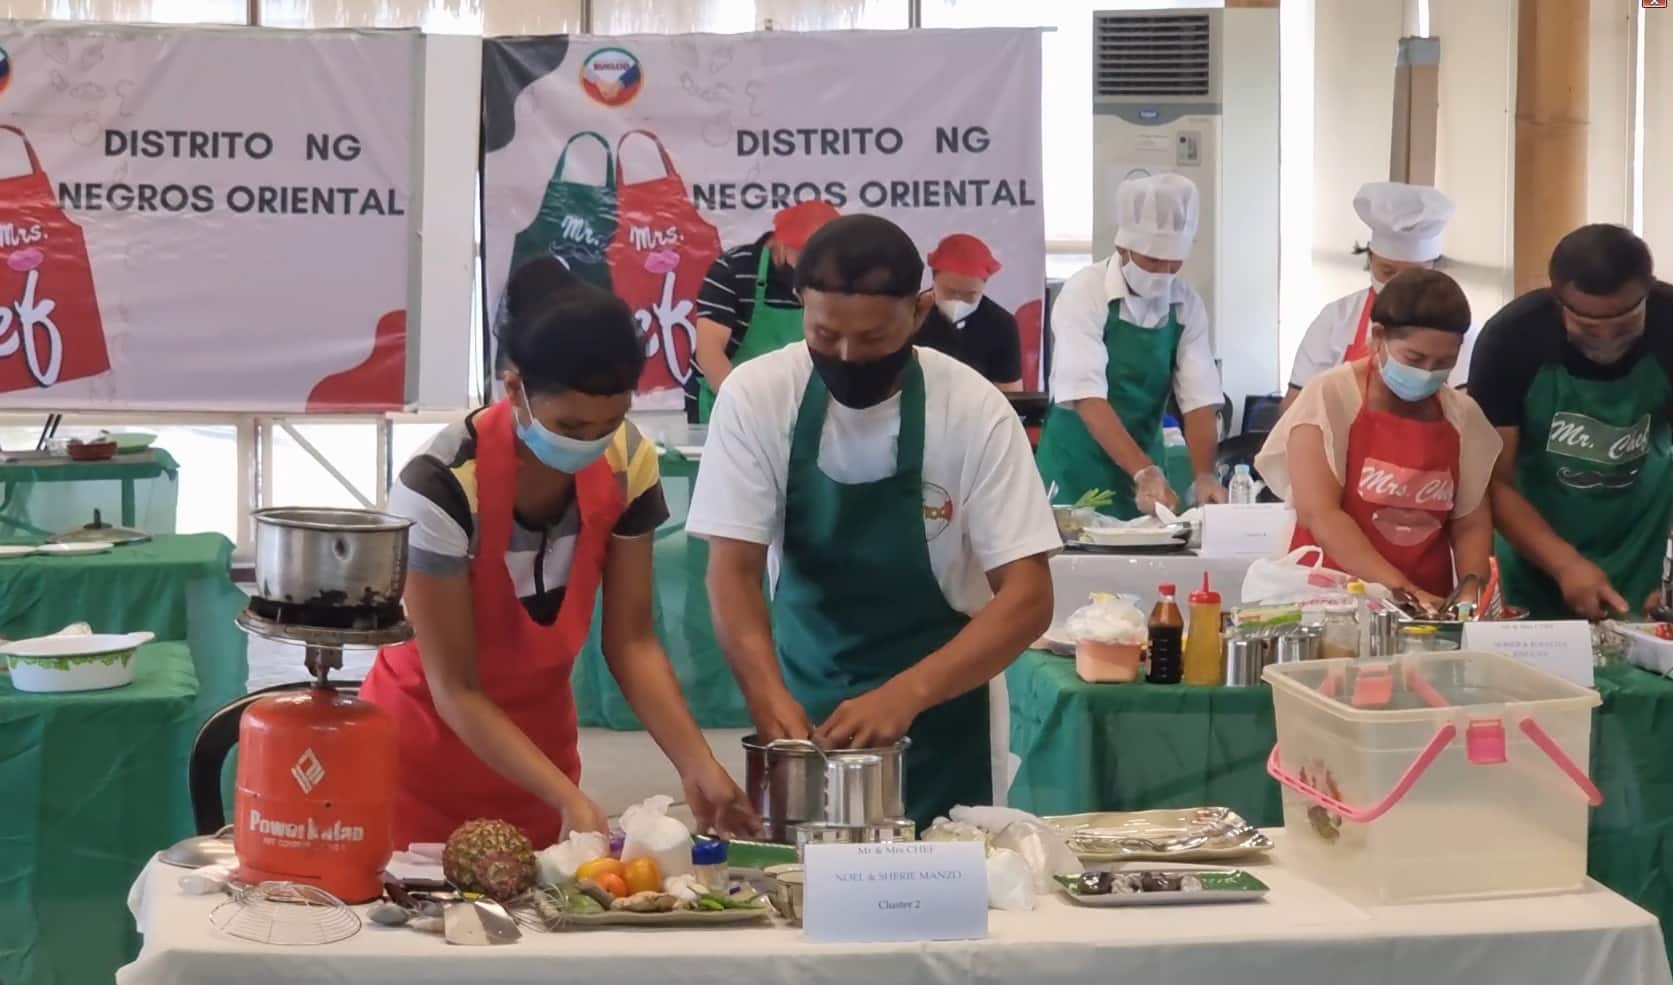 ‘Mr. and Mrs. Chef’ finals held in Negros Oriental District